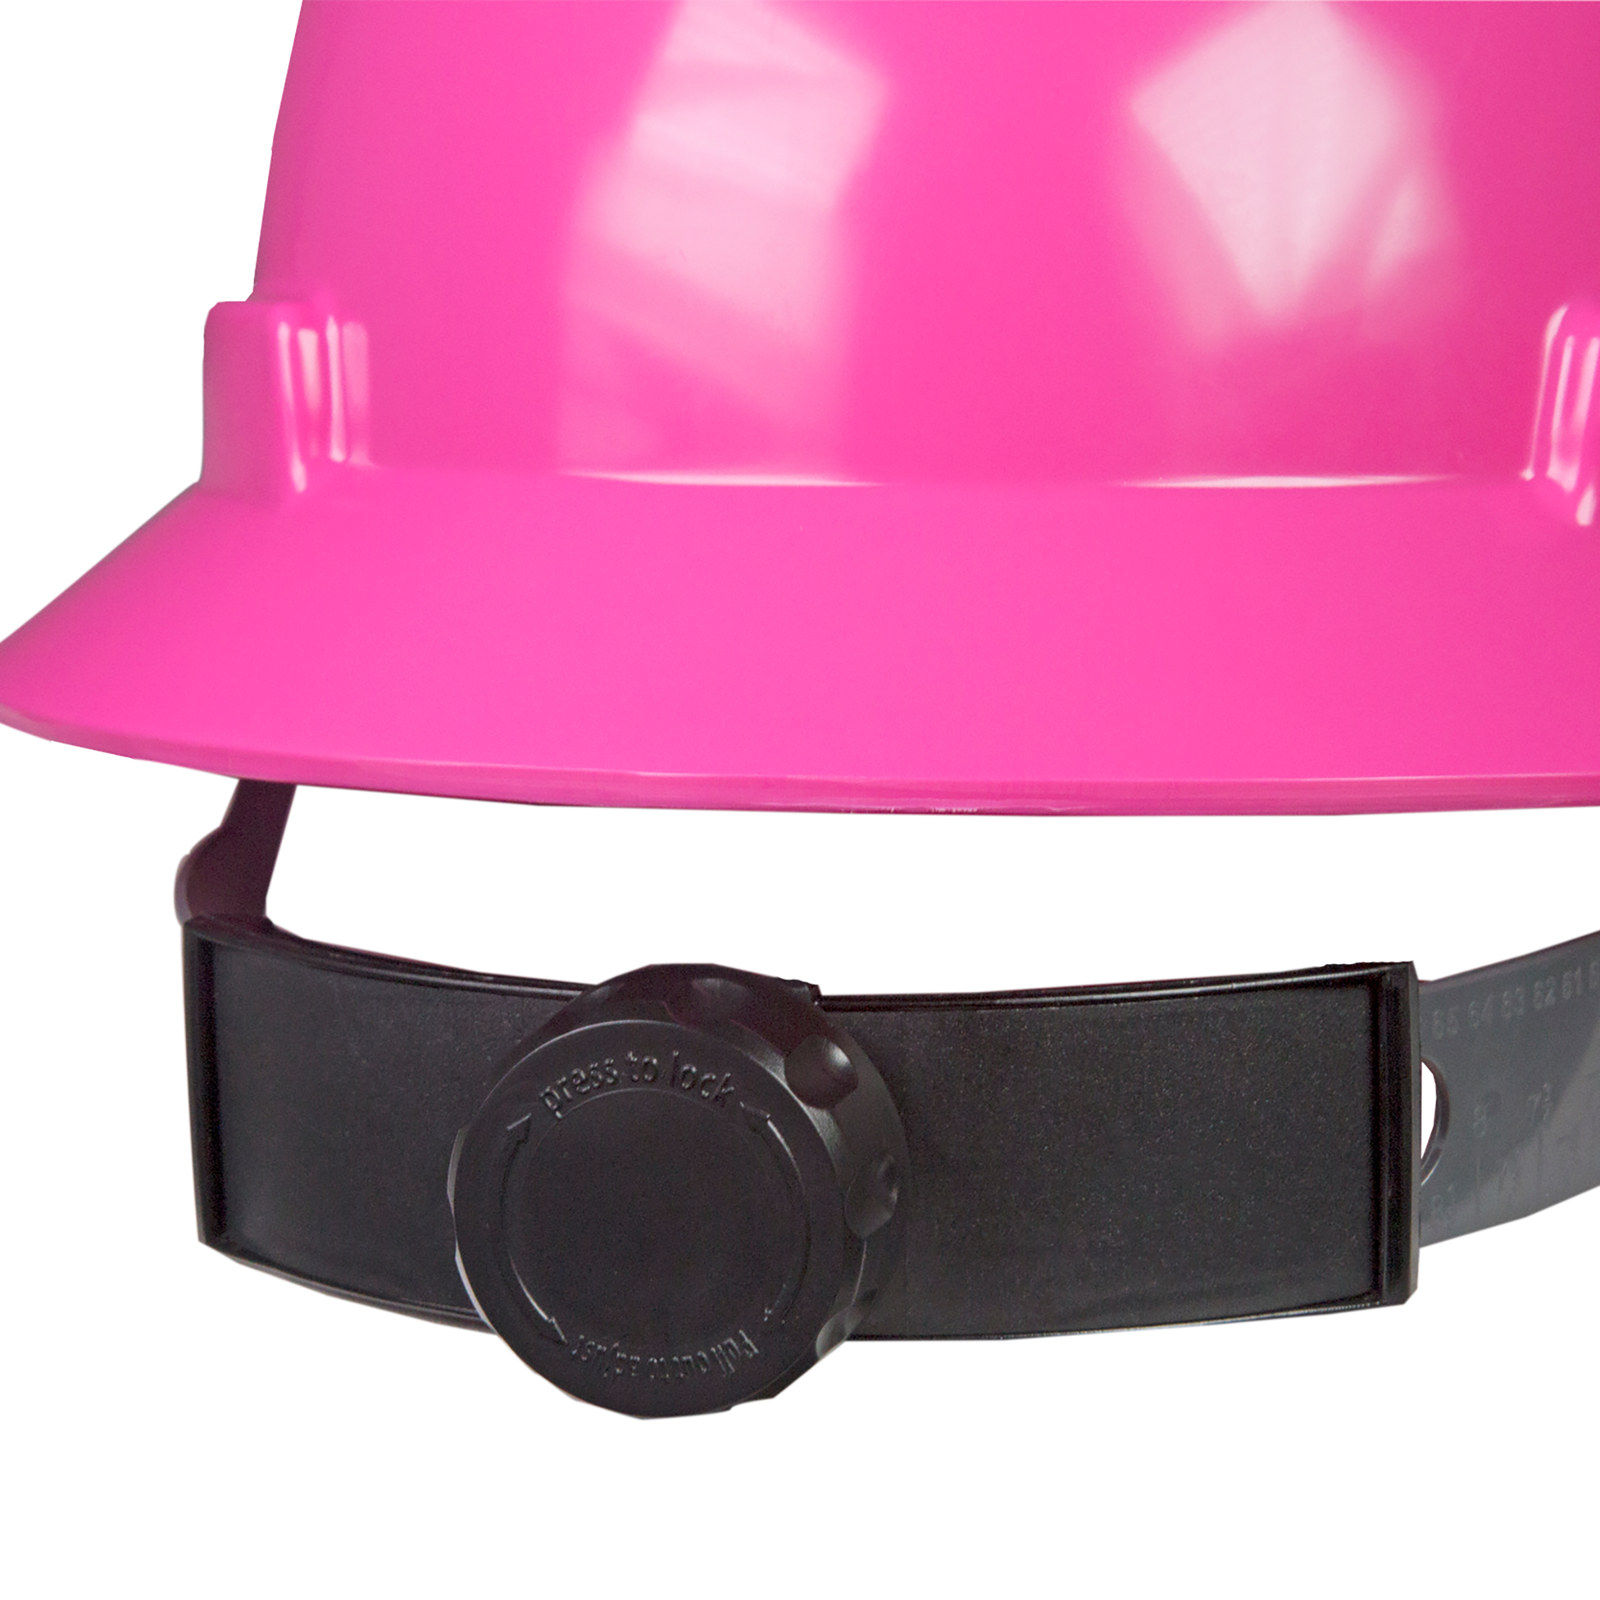 Close-up of the wheel ratchet adjustment on the pink hard hat with 4 point suspension for PPE